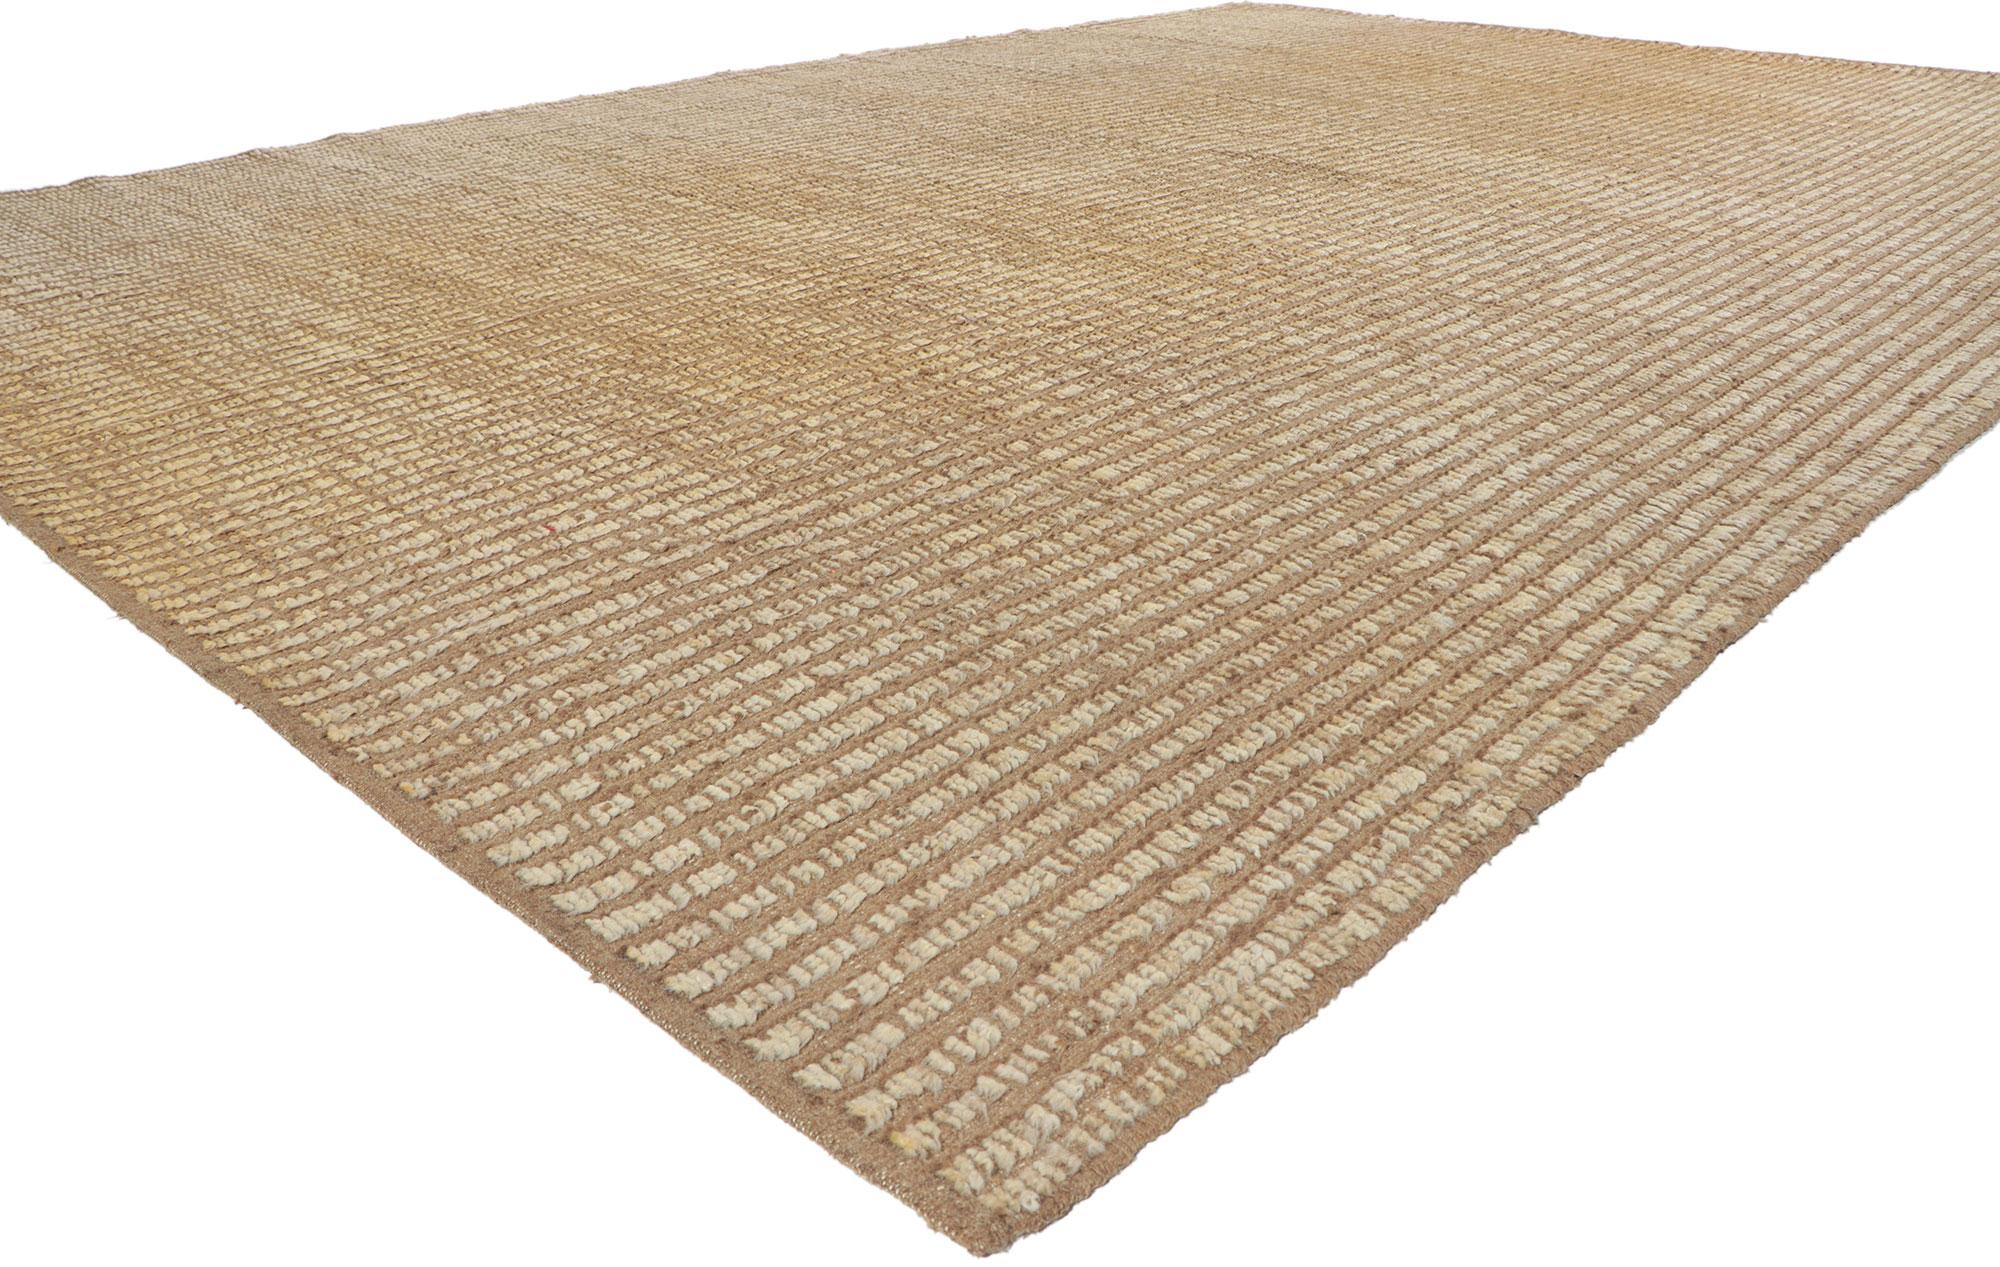 80811 New Moroccan style rug with short pile, 09'10 x 13'11. With its simplicity, incredible detail and texture, this hand knotted wool contemporary Moroccan rug is a captivating vision of woven beauty. The subtle stripe pattern and earthy colorway